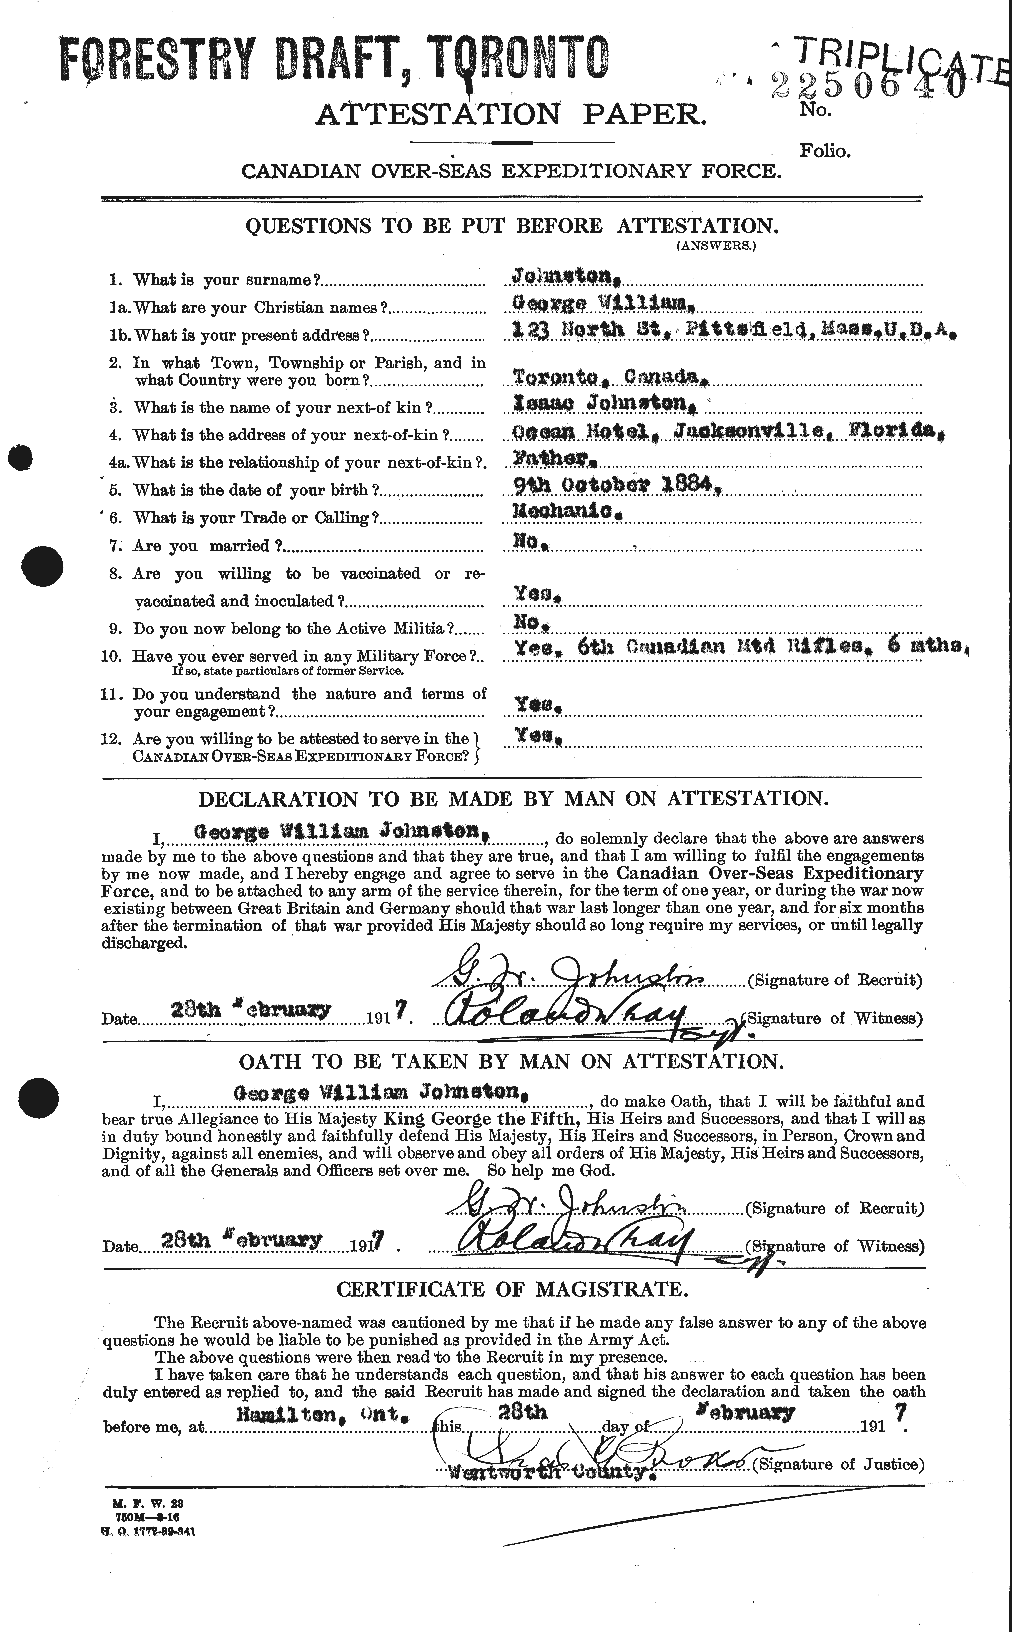 Personnel Records of the First World War - CEF 419453a